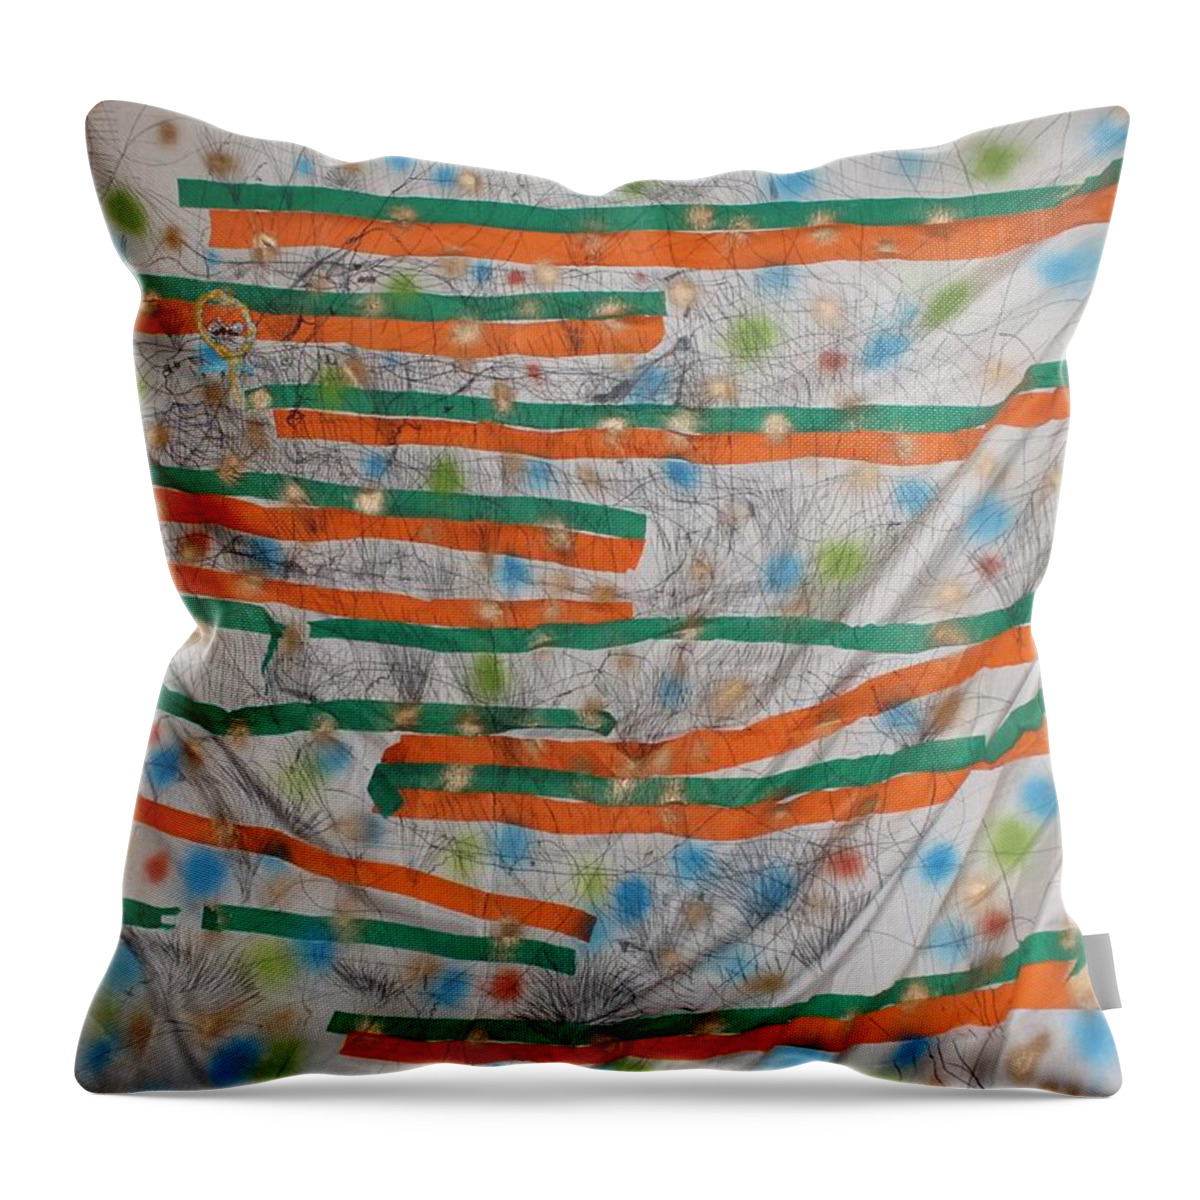 Jesus Throw Pillow featuring the painting Our Lady Of India by Gloria Ssali